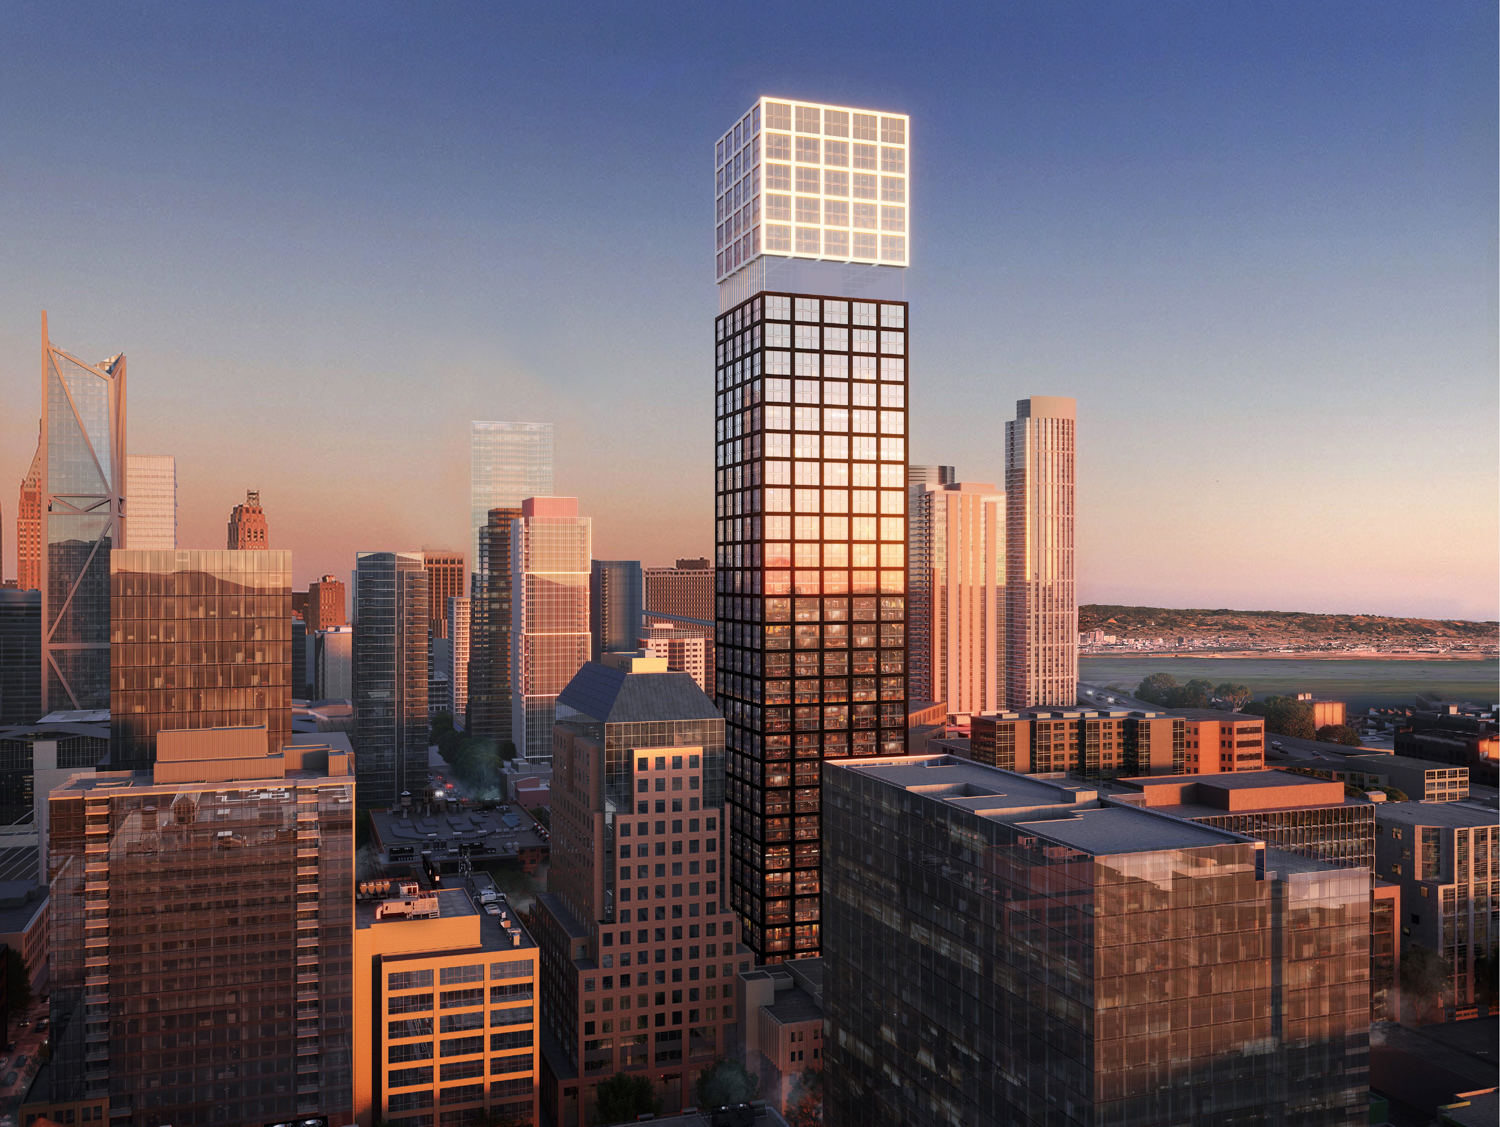 620 Folsom Street sunset aerial view, rendering by Arquitectonica